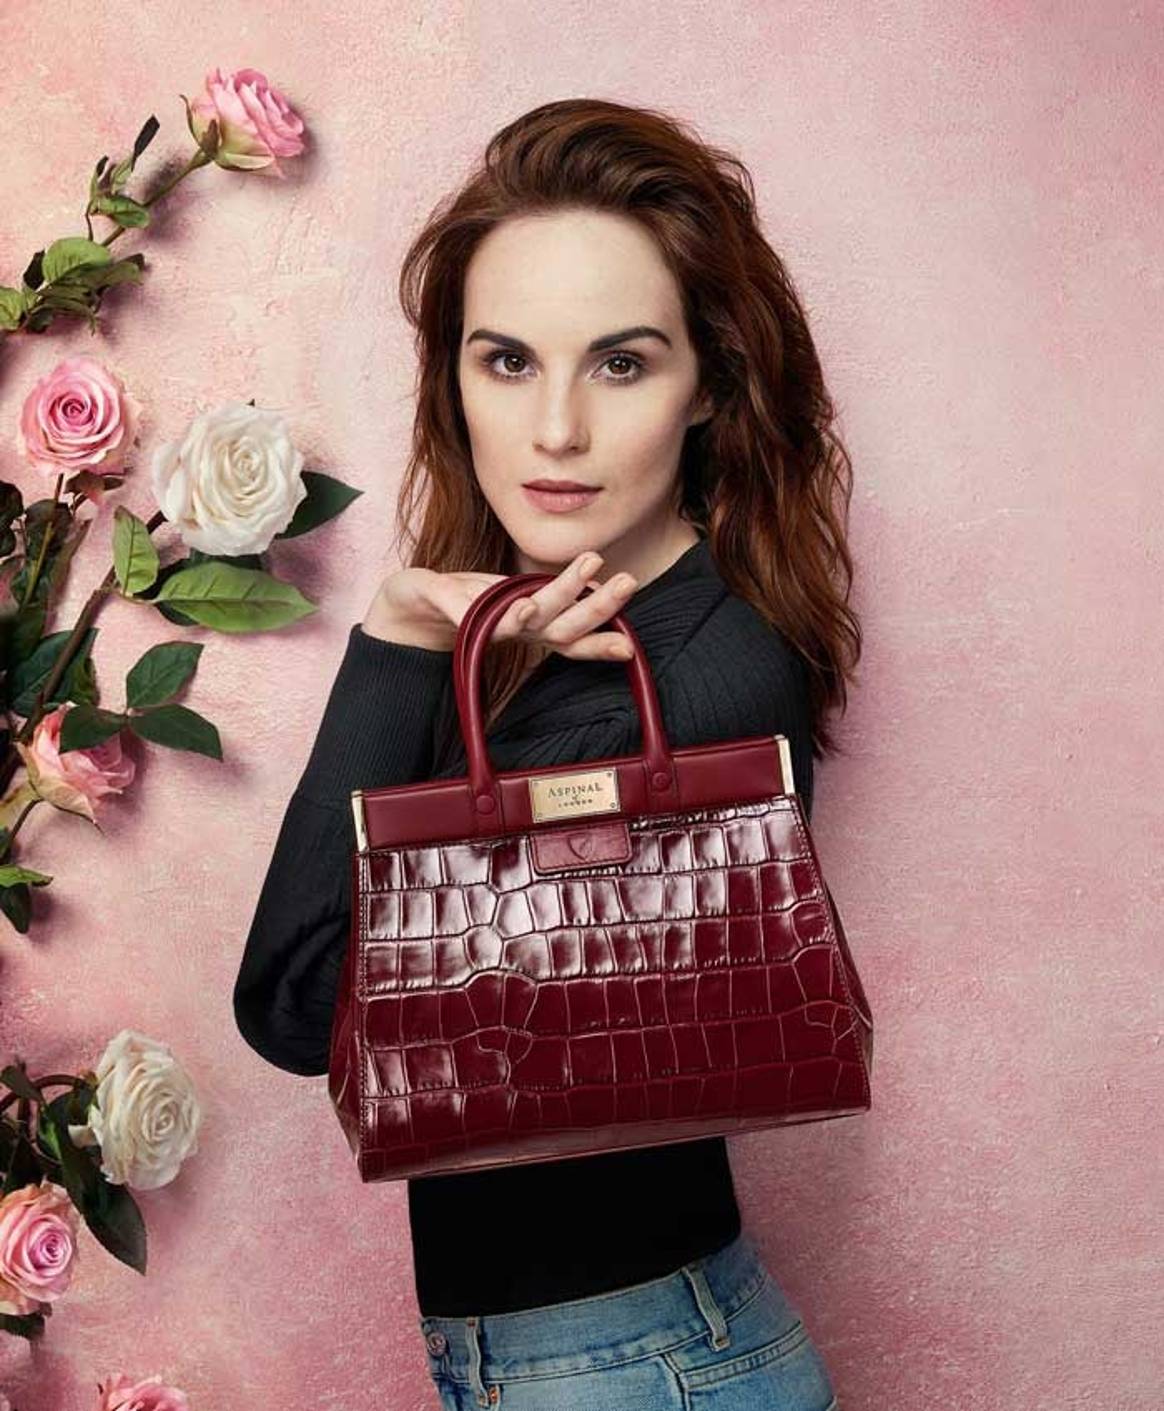 Aspinal of London teams up with Michelle Dockery